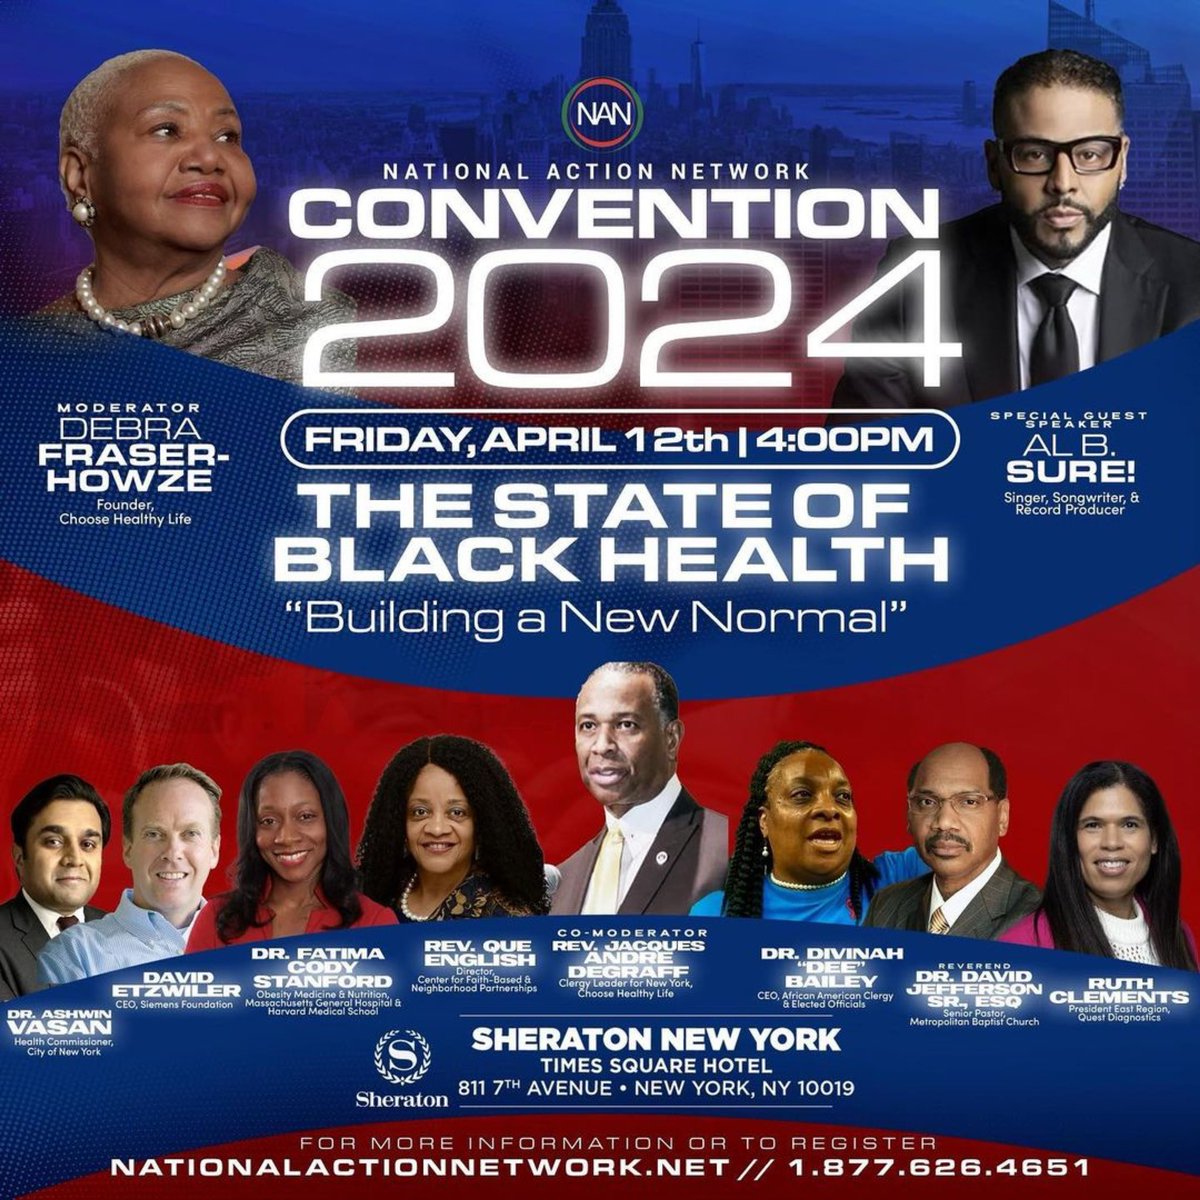 Join us TODAY for DAY 3 of the National Action Network 2024 Convention. Free registration is available on site 8am-5pm and online at nanconvention2024.com. #NANCONV2024